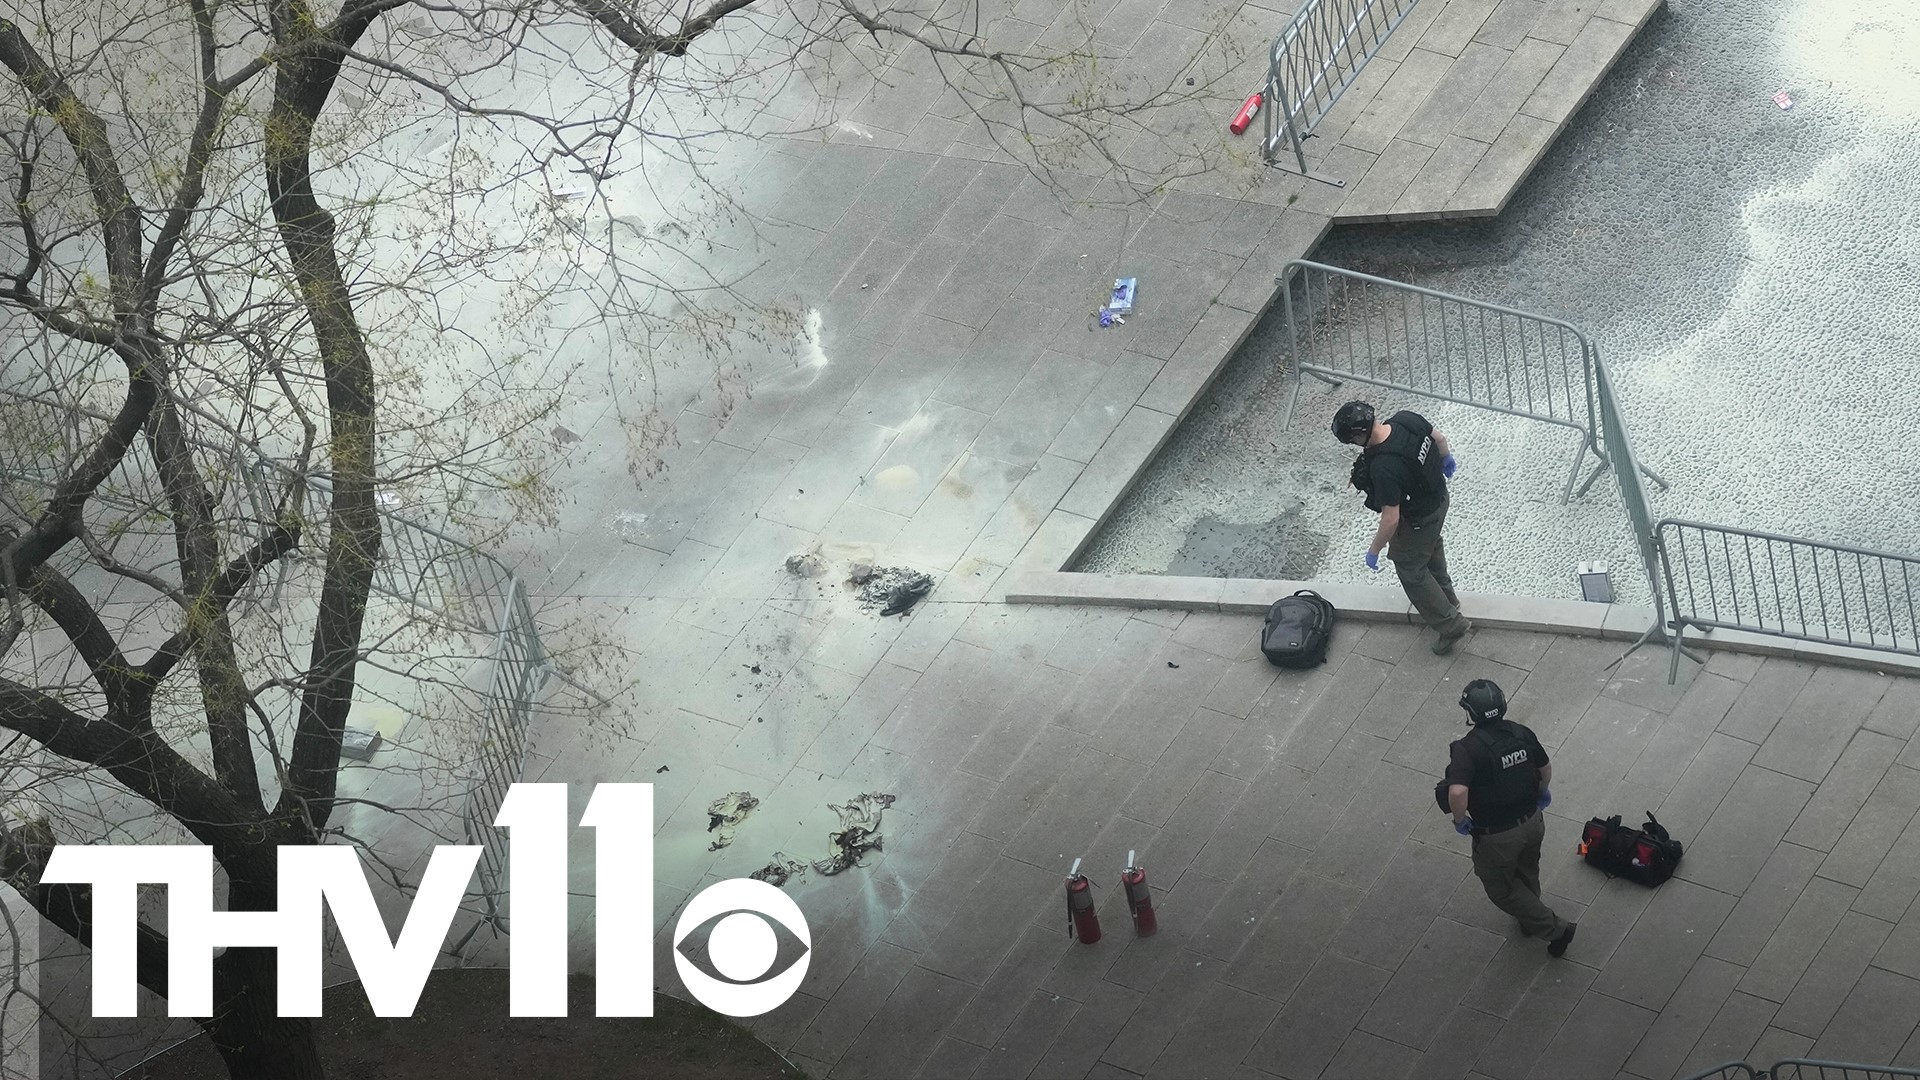 Witnesses described a horrific scene outside the criminal courthouse in Manhattan where they saw a man set himself on fire during Trump's hush money trial.